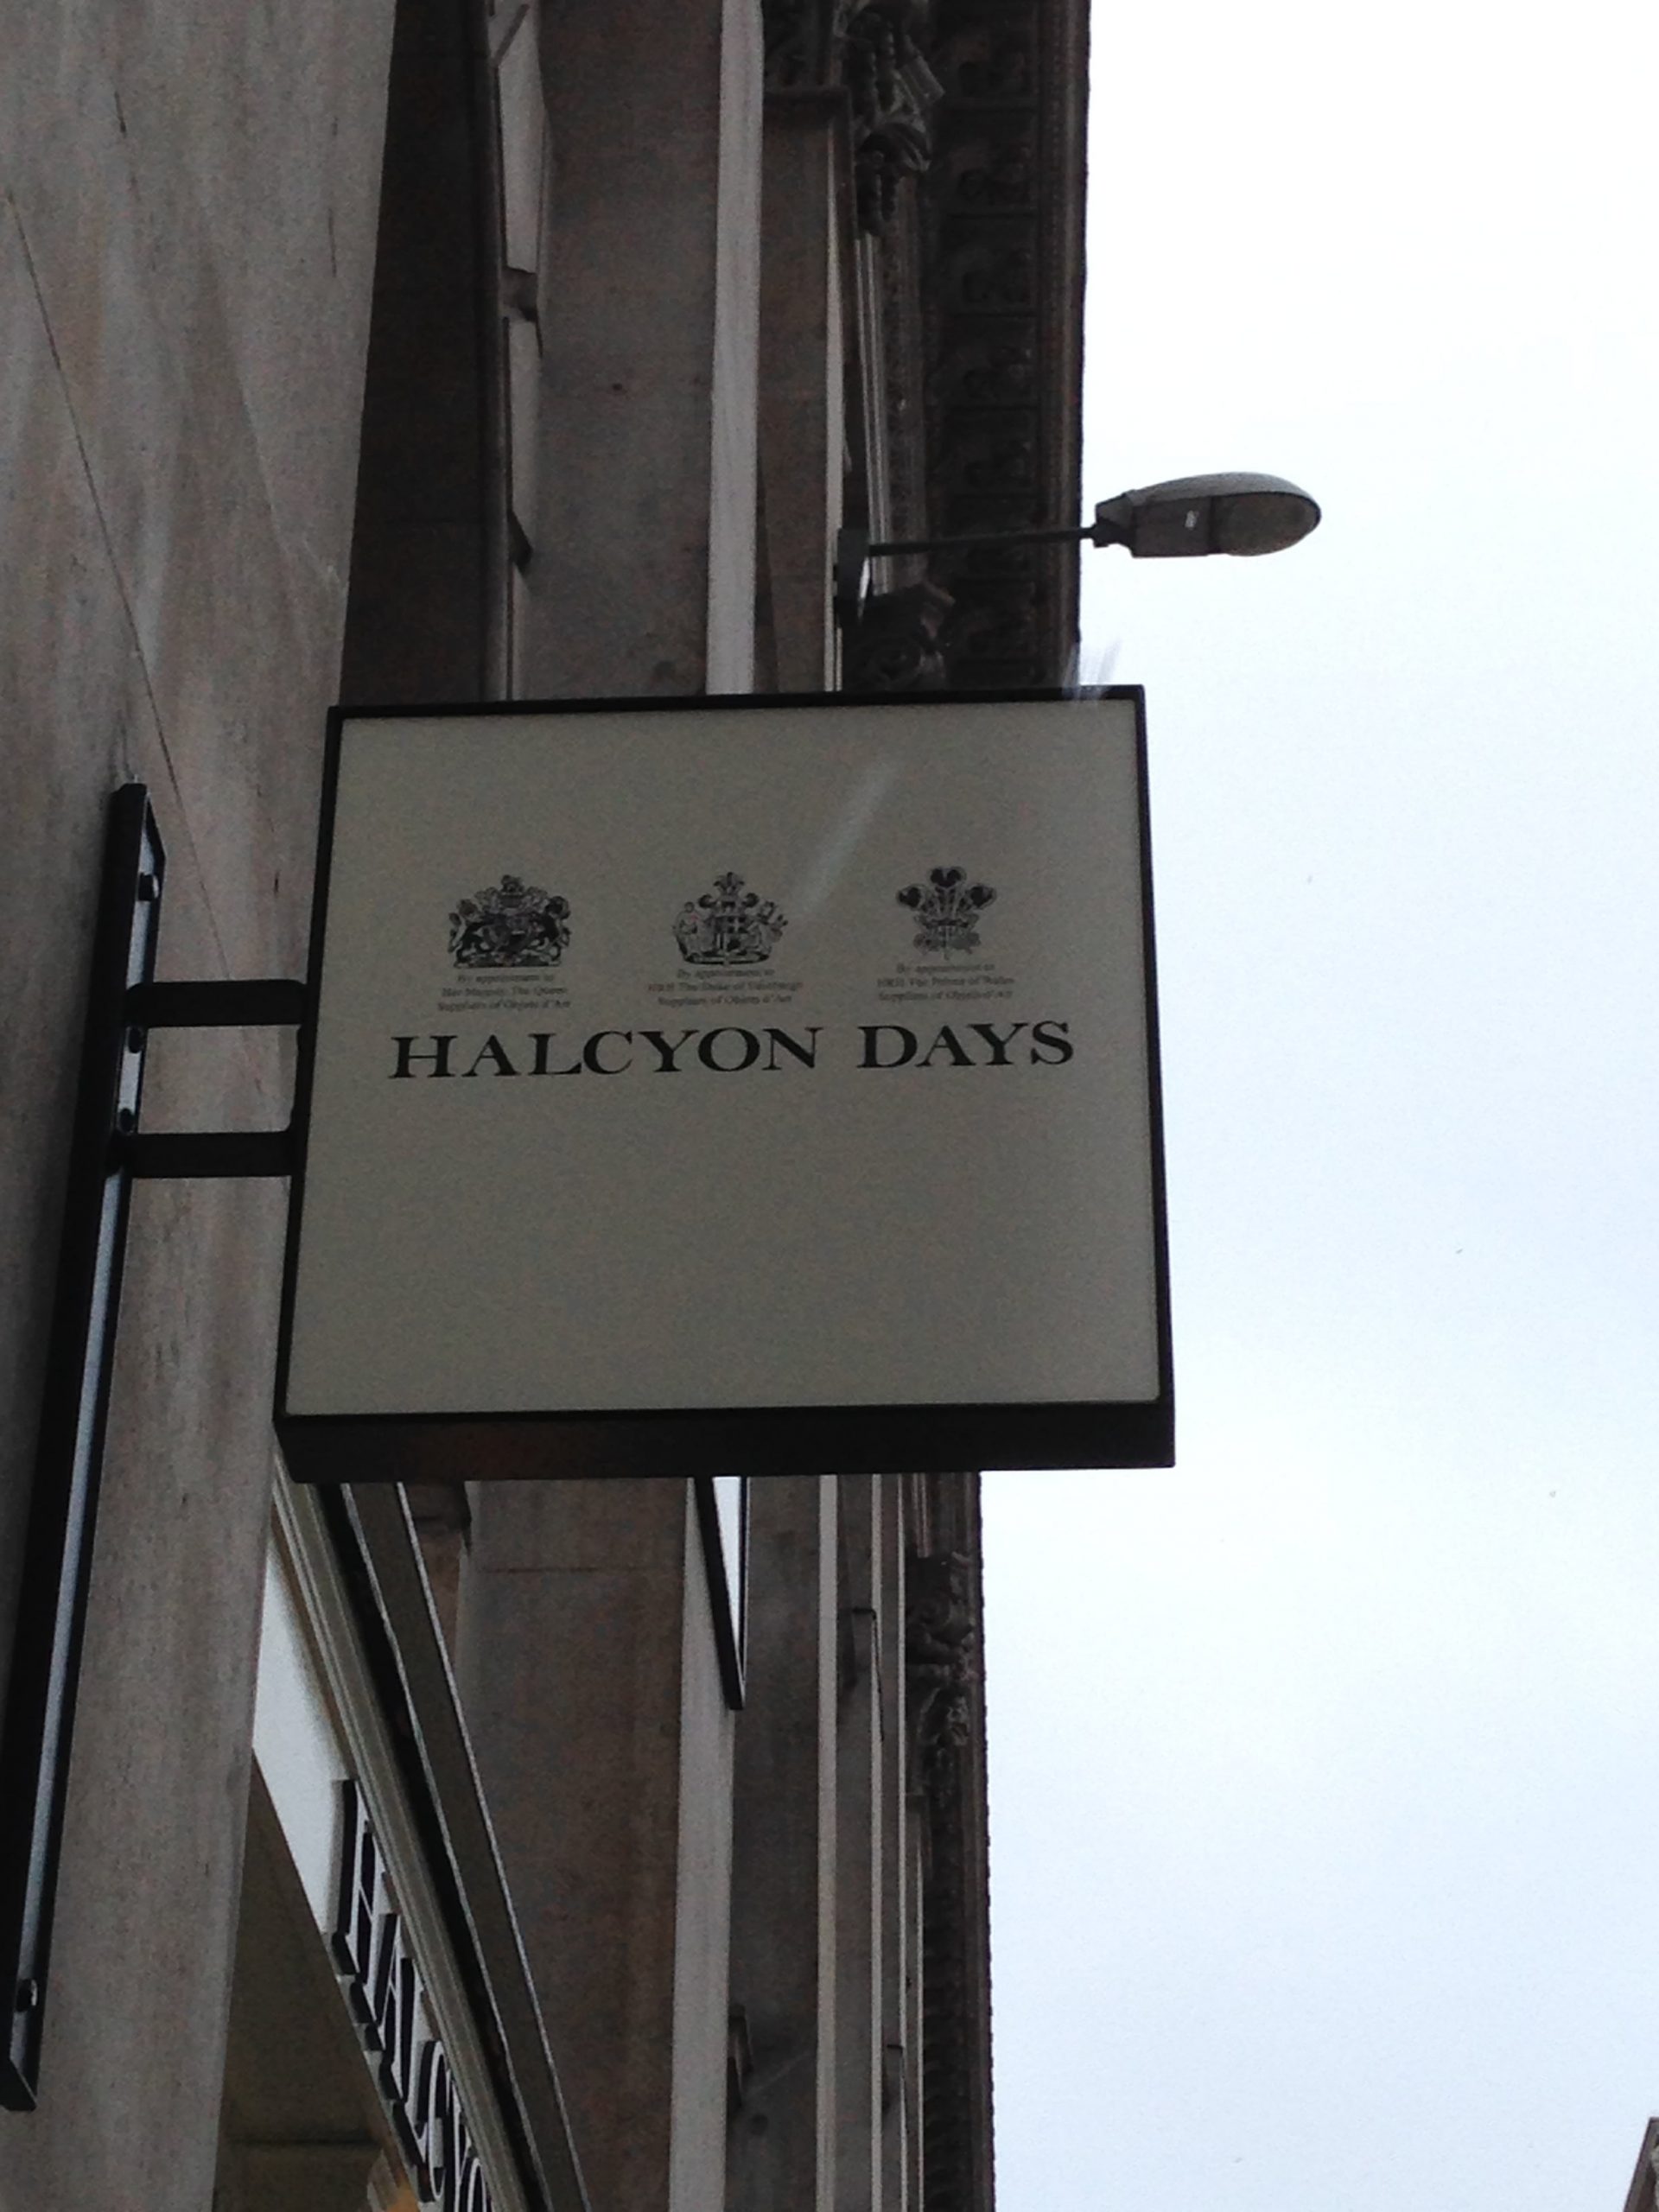 HALCYON DAYS projecting sign